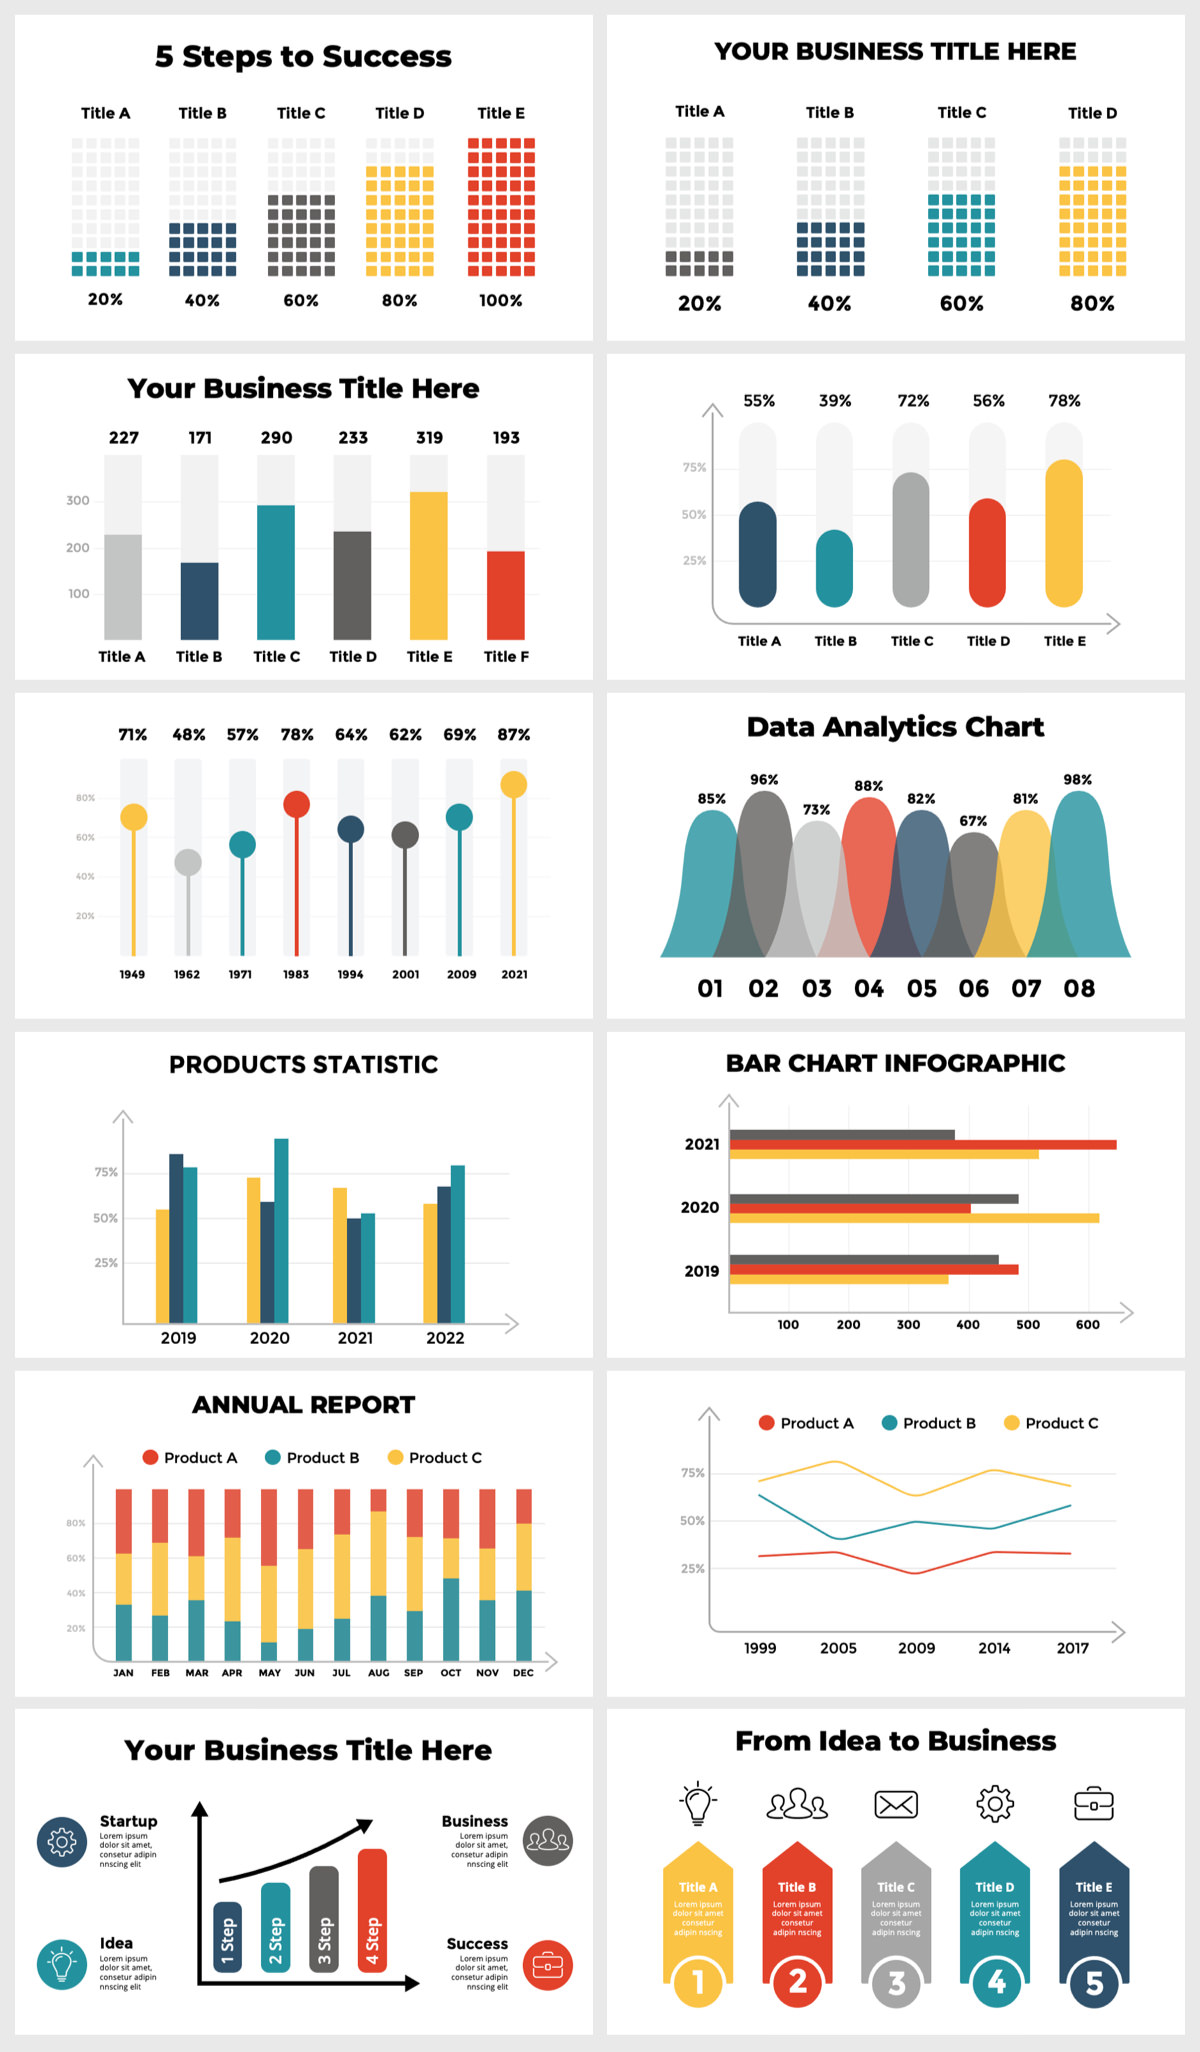 Wowly - 3500 Infographics & Presentation Templates! Updated! PowerPoint Canva Figma Sketch Ai Psd. - 182